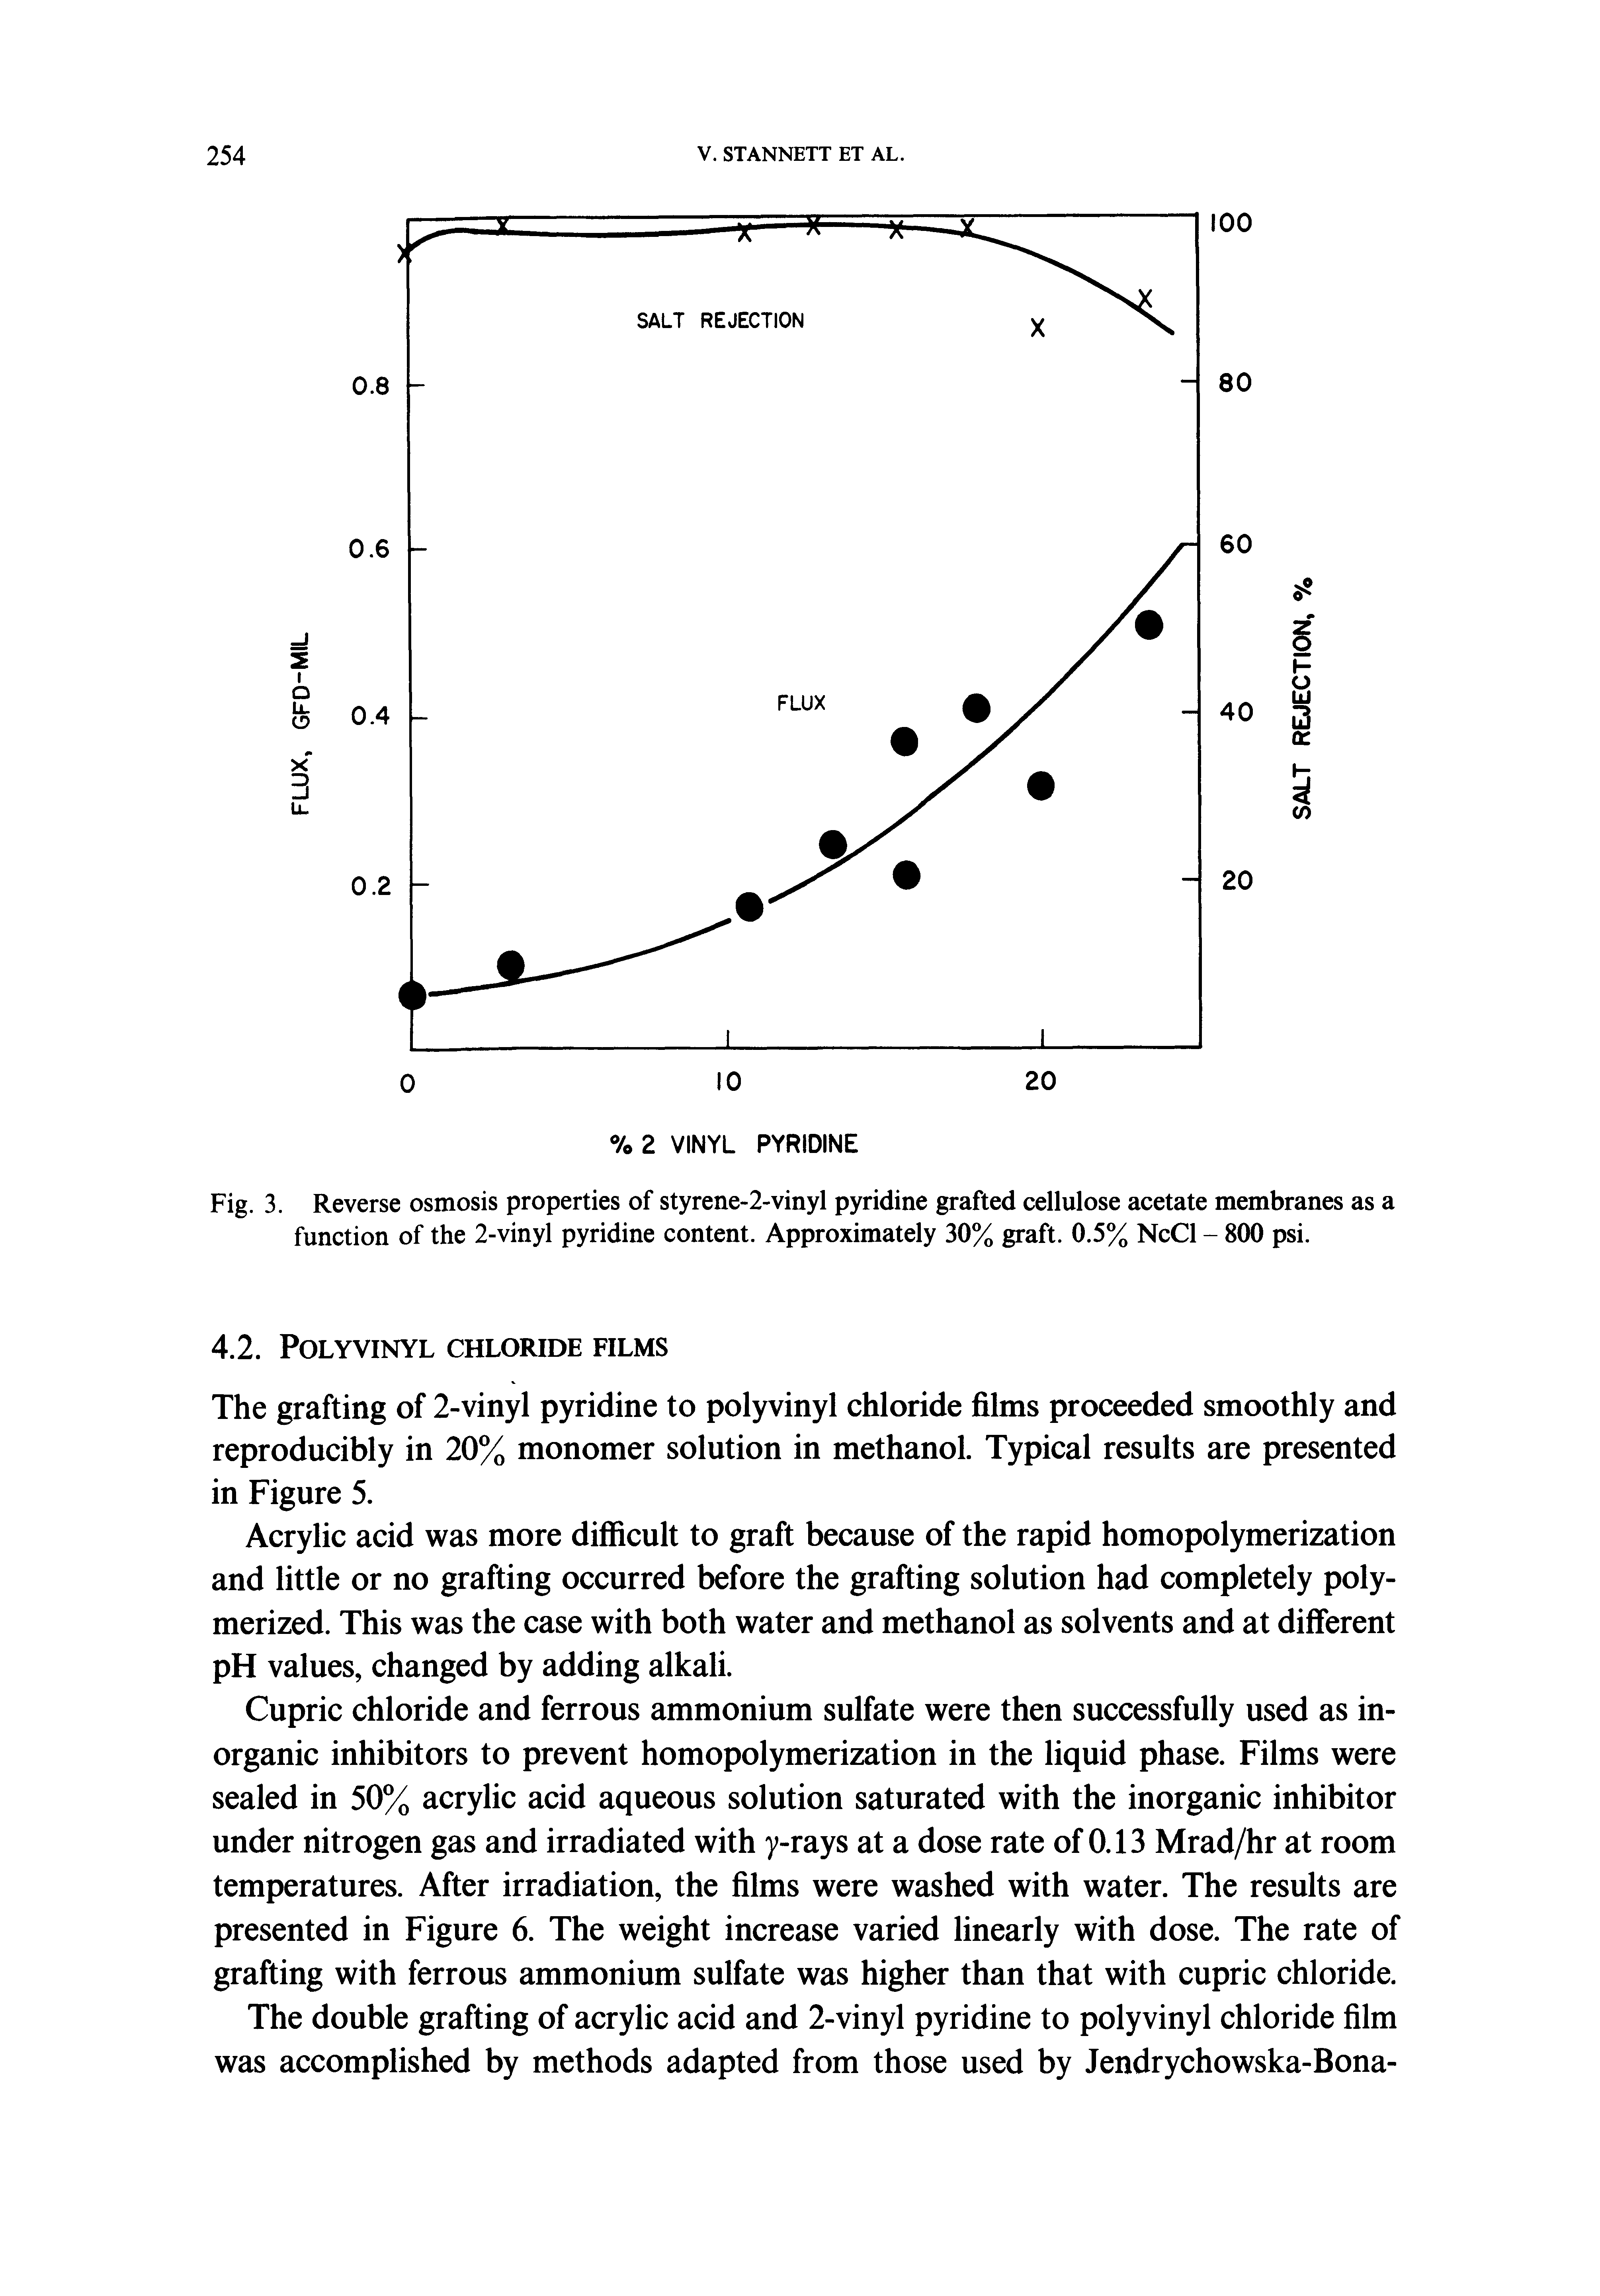 Fig. 3. Reverse osmosis properties of styrene-2-vinyl pyridine grafted cellulose acetate membranes as i function of the 2-vinyl pyridine content. Approximately 30% graft. 0.5% NcCl - 800 psi.